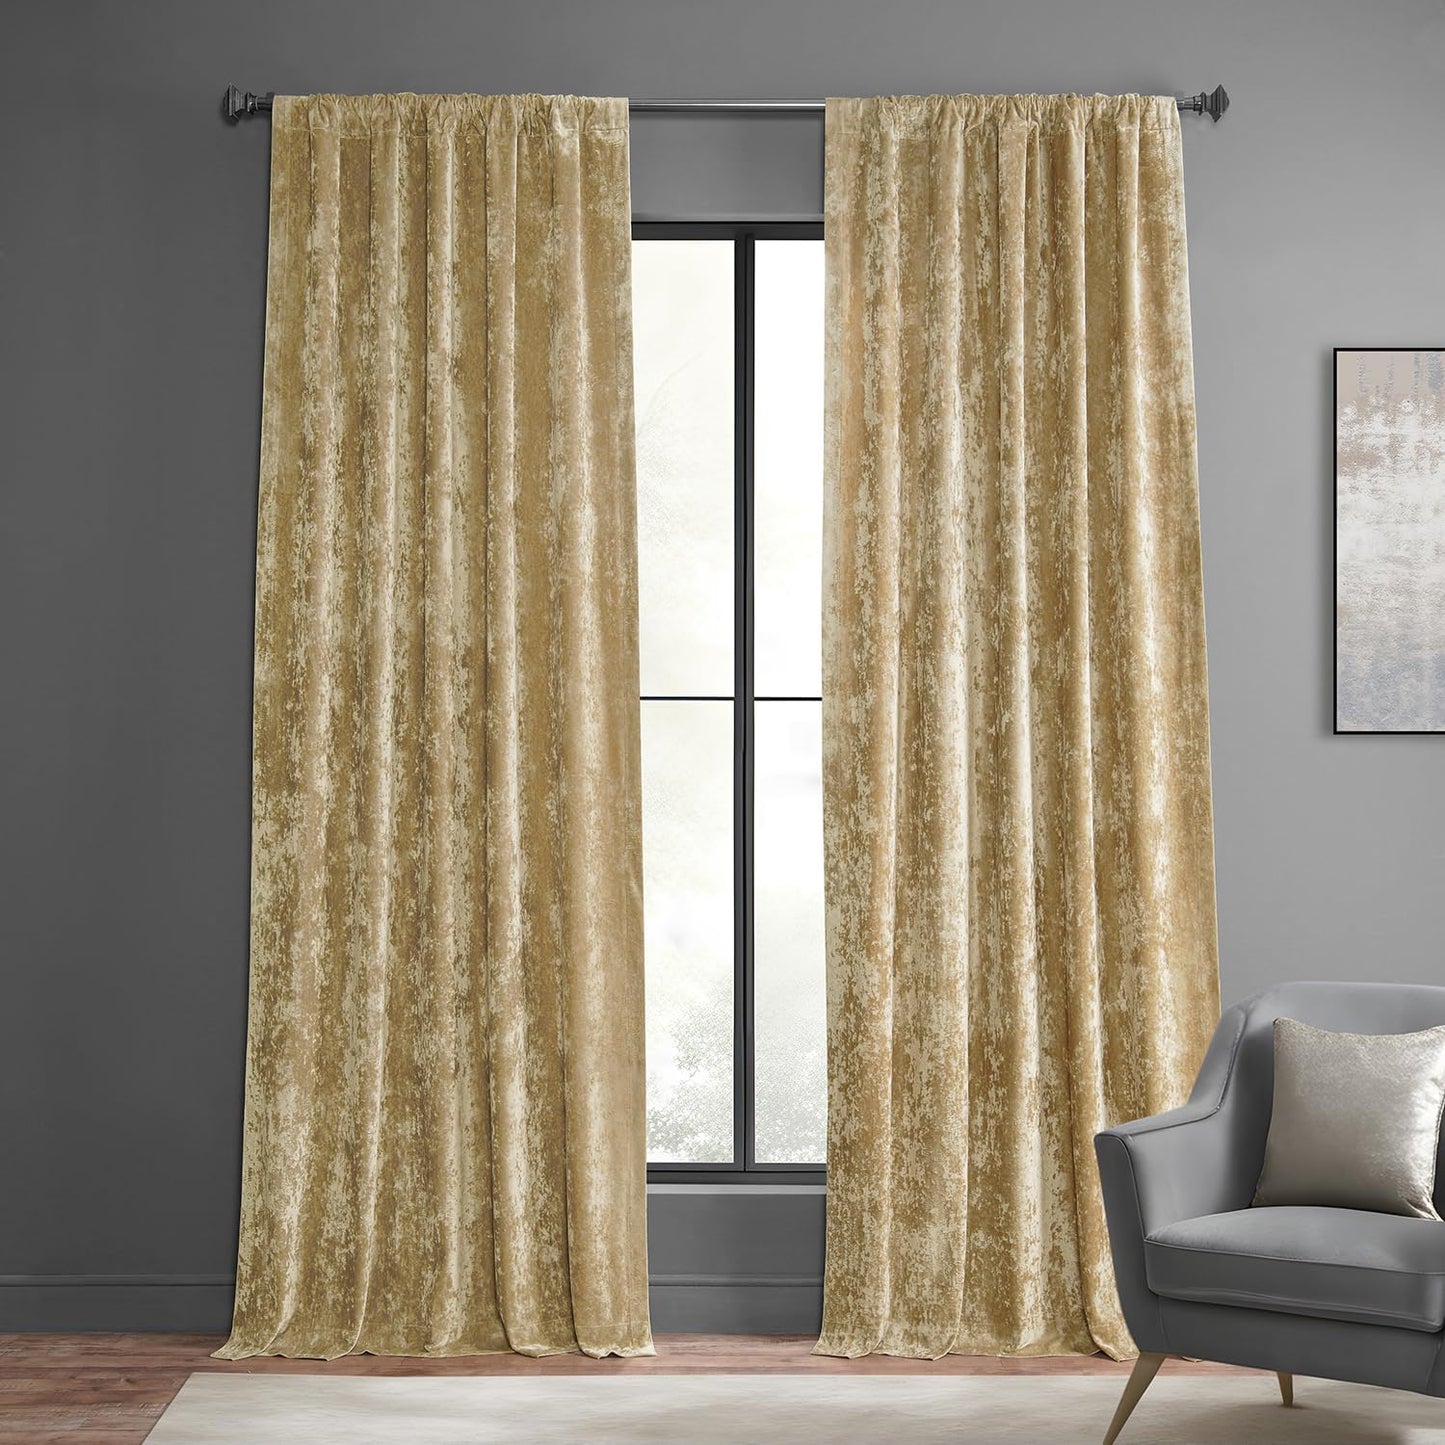 HPD Half Price Drapes Lush Crush Velvet Curtains - Room Darkening Curtain 96 Inches Long for Bedroom & Living Room, Luxury Look, Rod Pocket Design, (1 Panel), 50W X 96L, Taupe  Exclusive Fabrics & Furnishings Gold 50W X 108L 